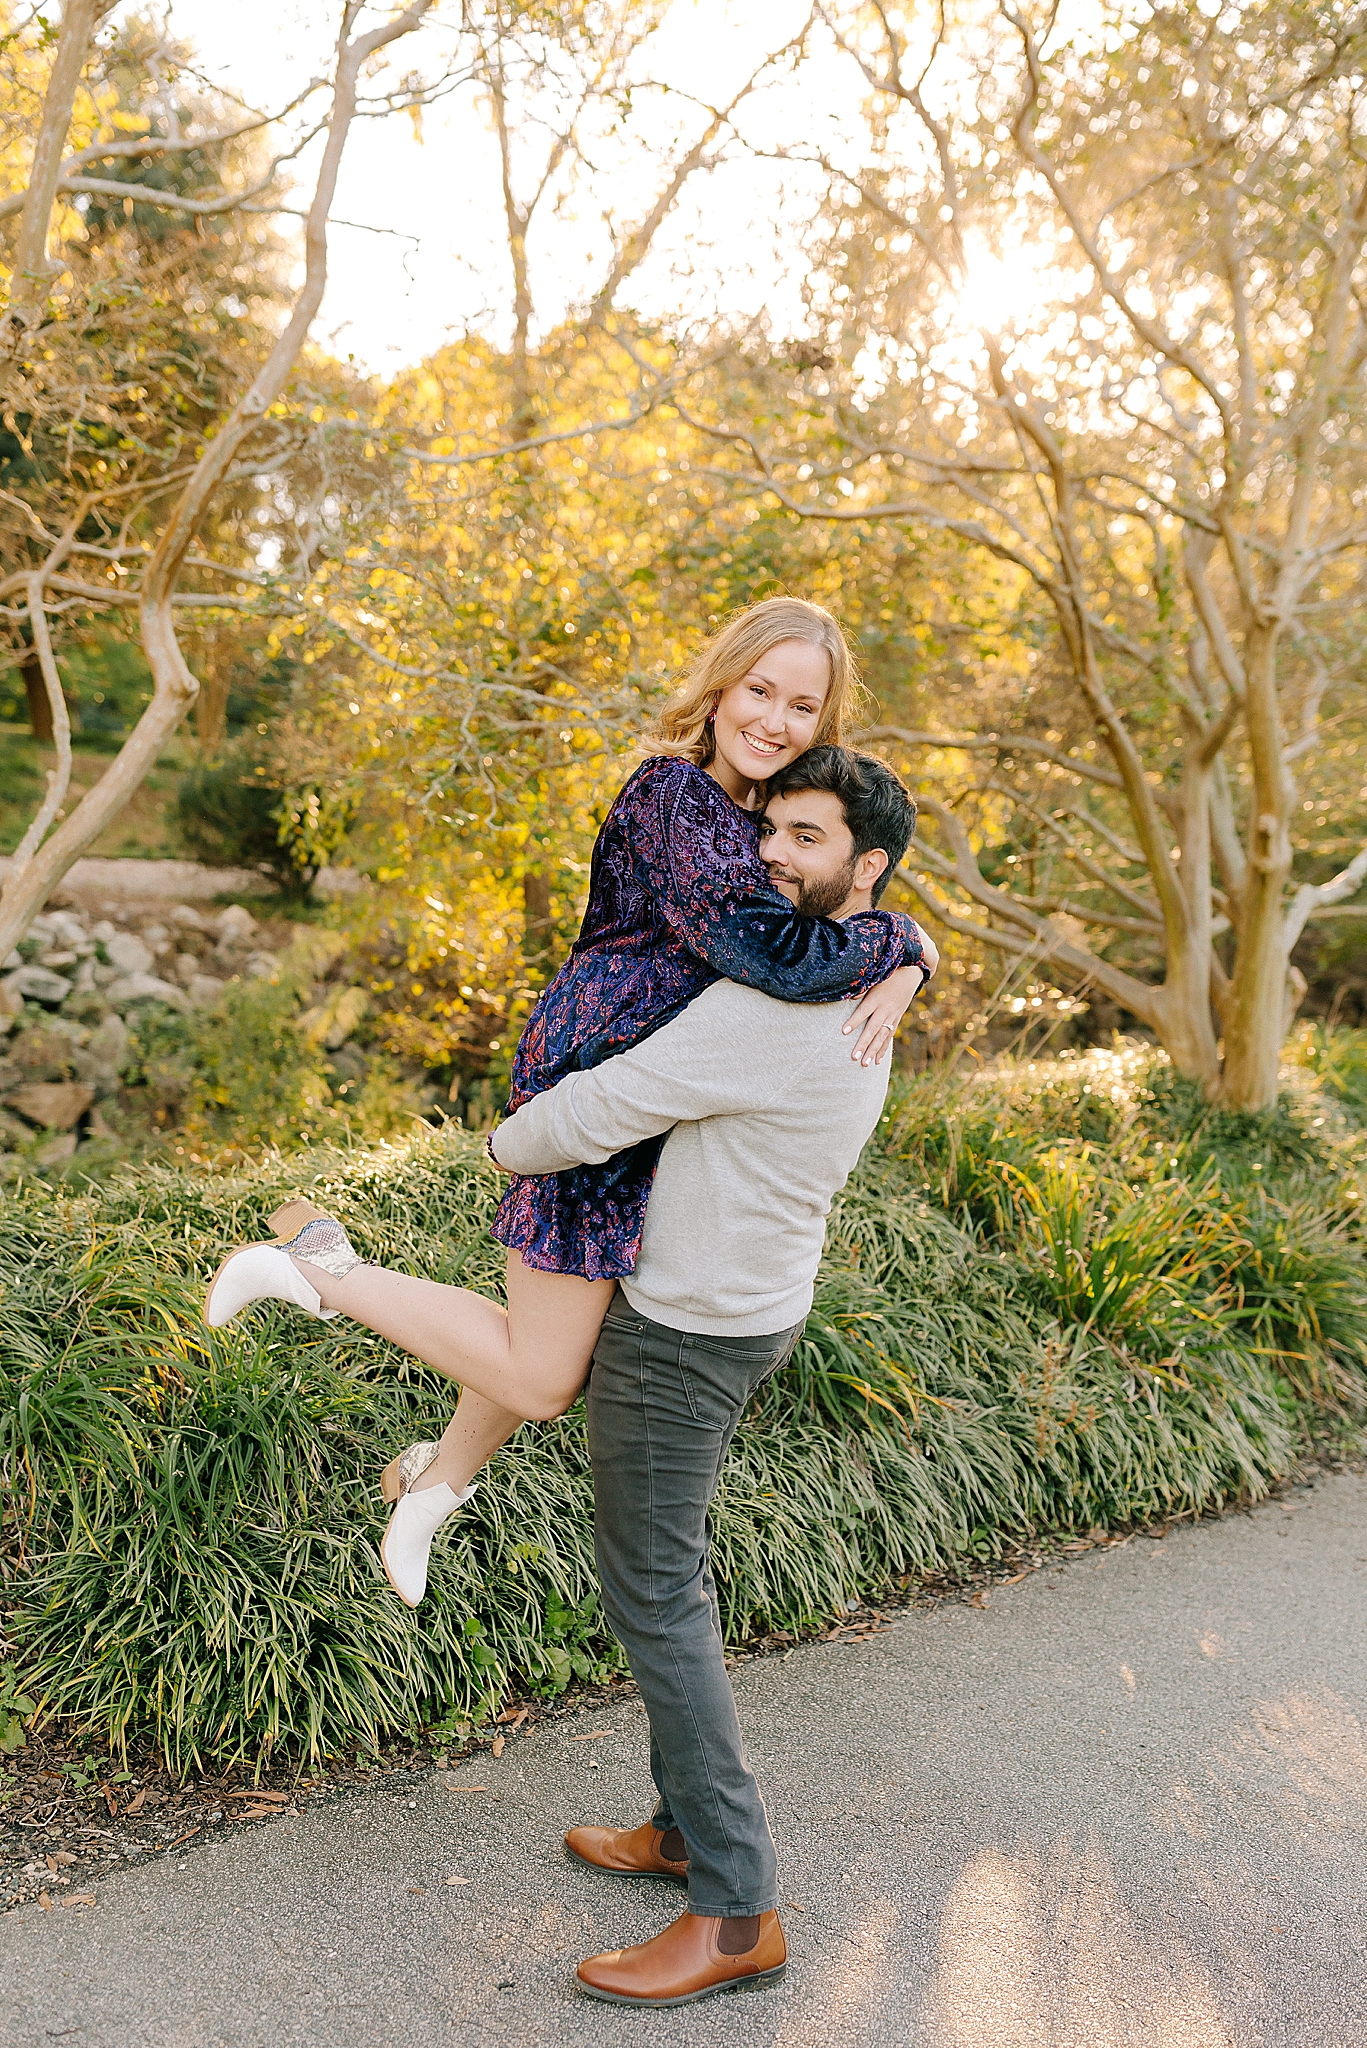 groom lifts bride up during engagement photos in Raleigh NC